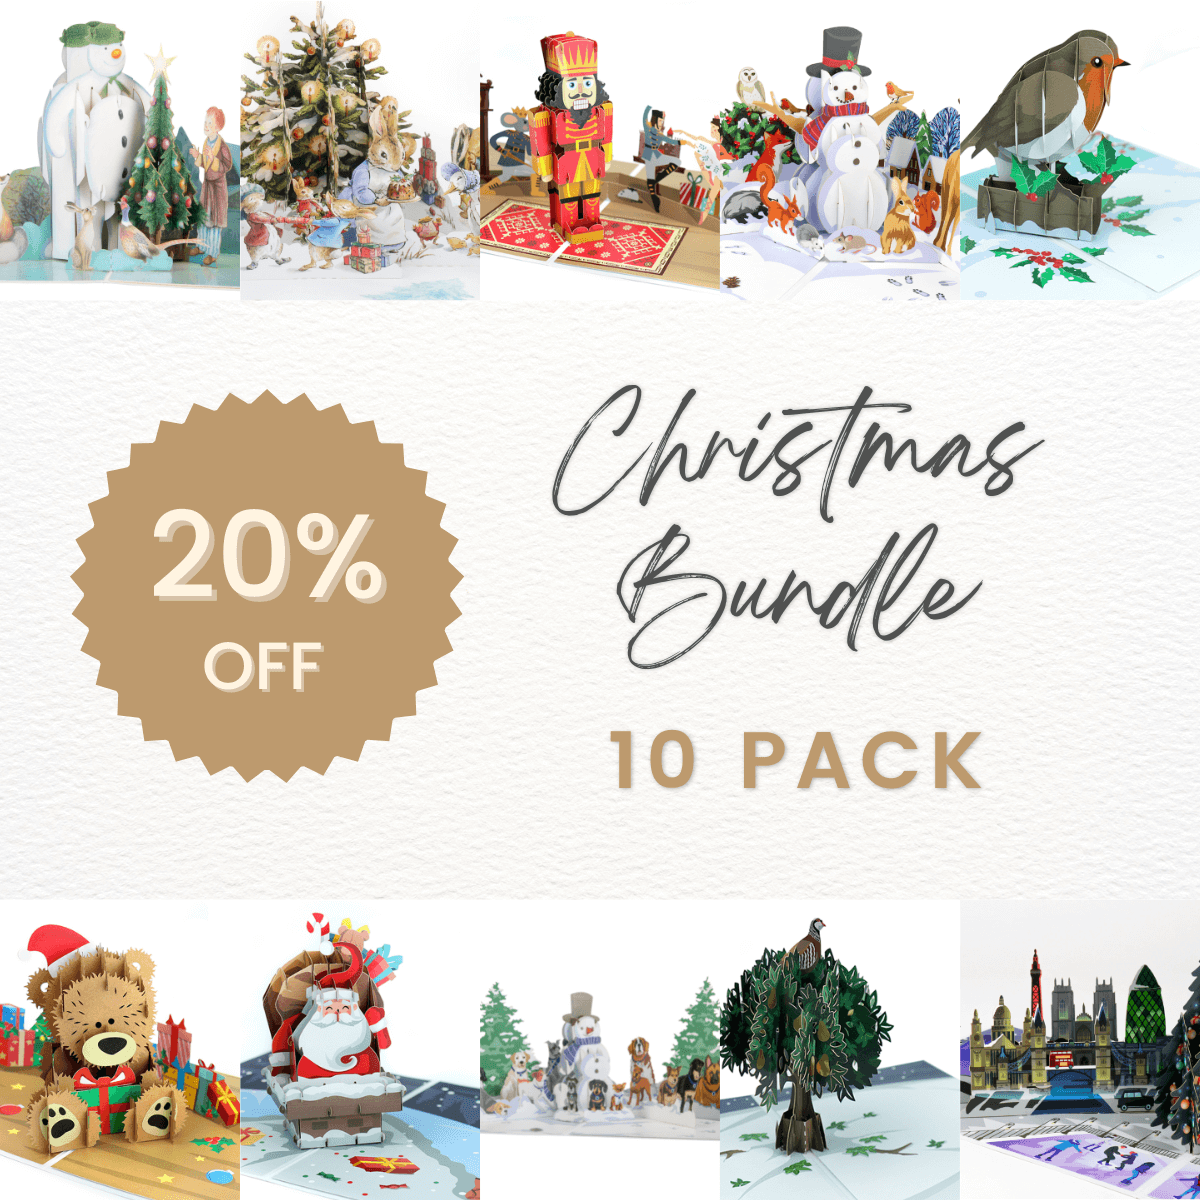 Christmas Card Pack Of 10 by Cardology which includes 10 intricate pop up cards from their best selling range.  This bundle offers incredible value with 20% off original prices